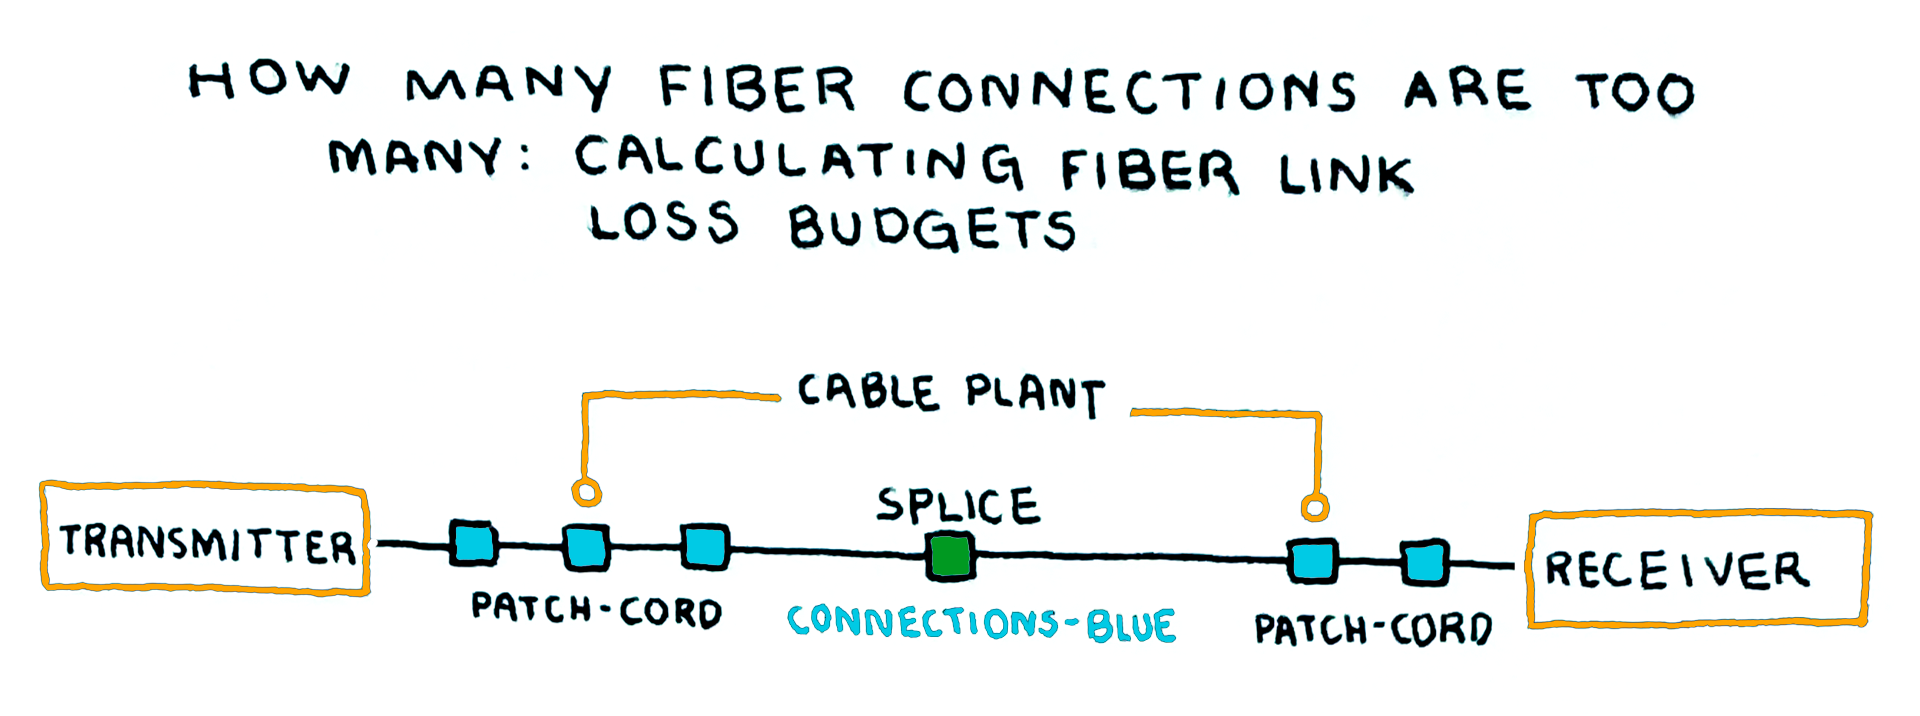 How Many Fiber Connections Are Too Many: Calculating Fiber Link Loss Budgets